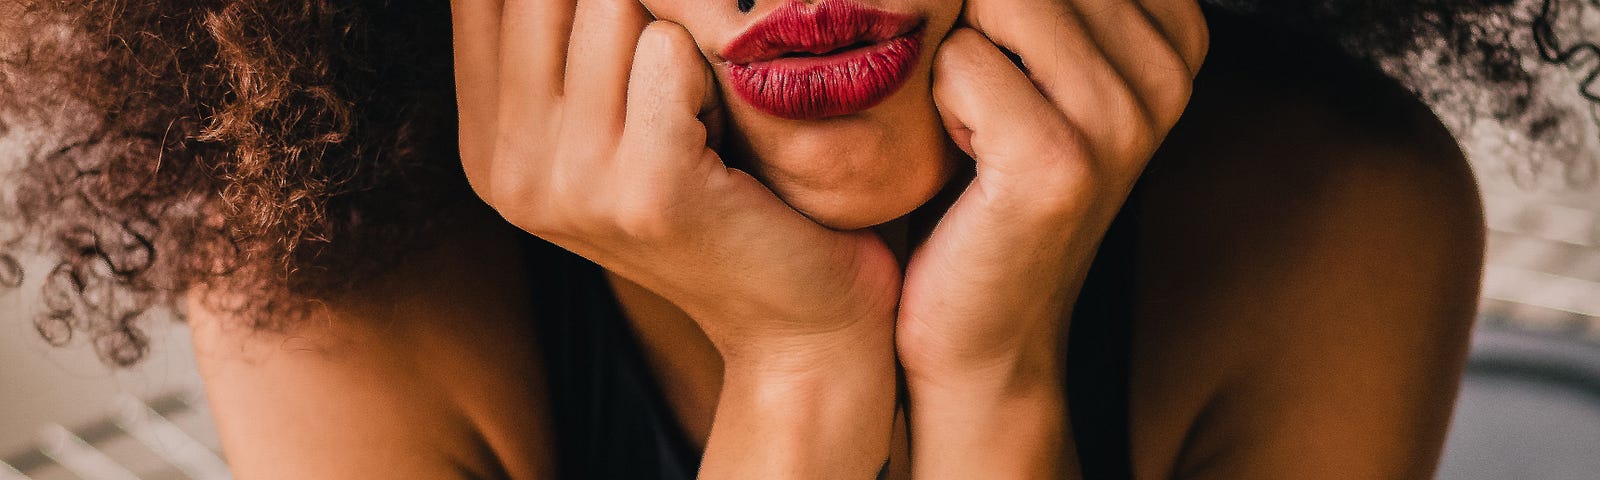 A black woman sitting with her face between her hands with pouting red lips.